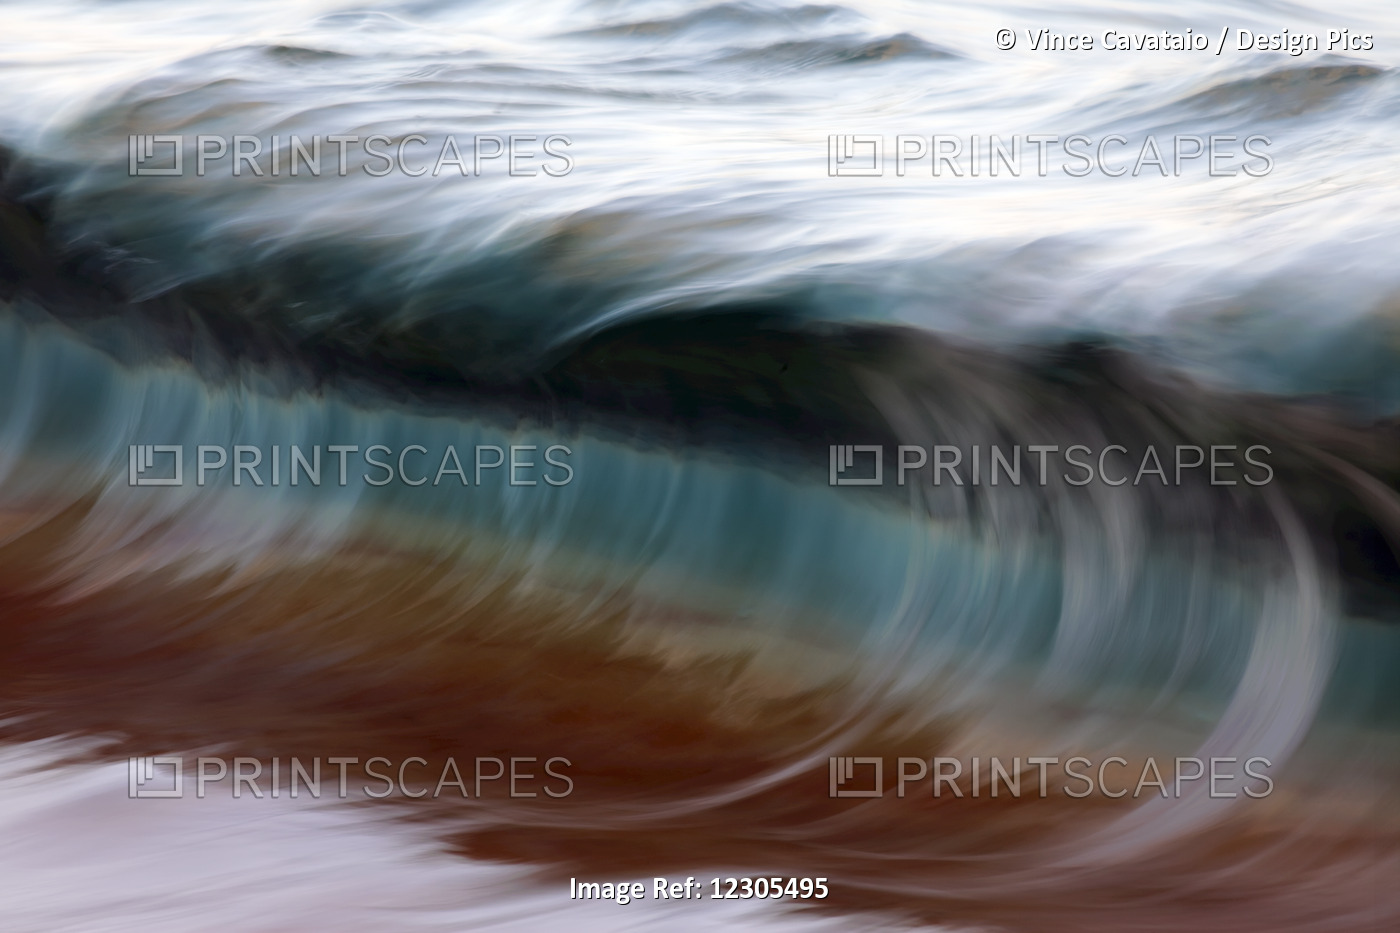 Ocean Wave Blurred By Motion; Hawaii, United States Of America